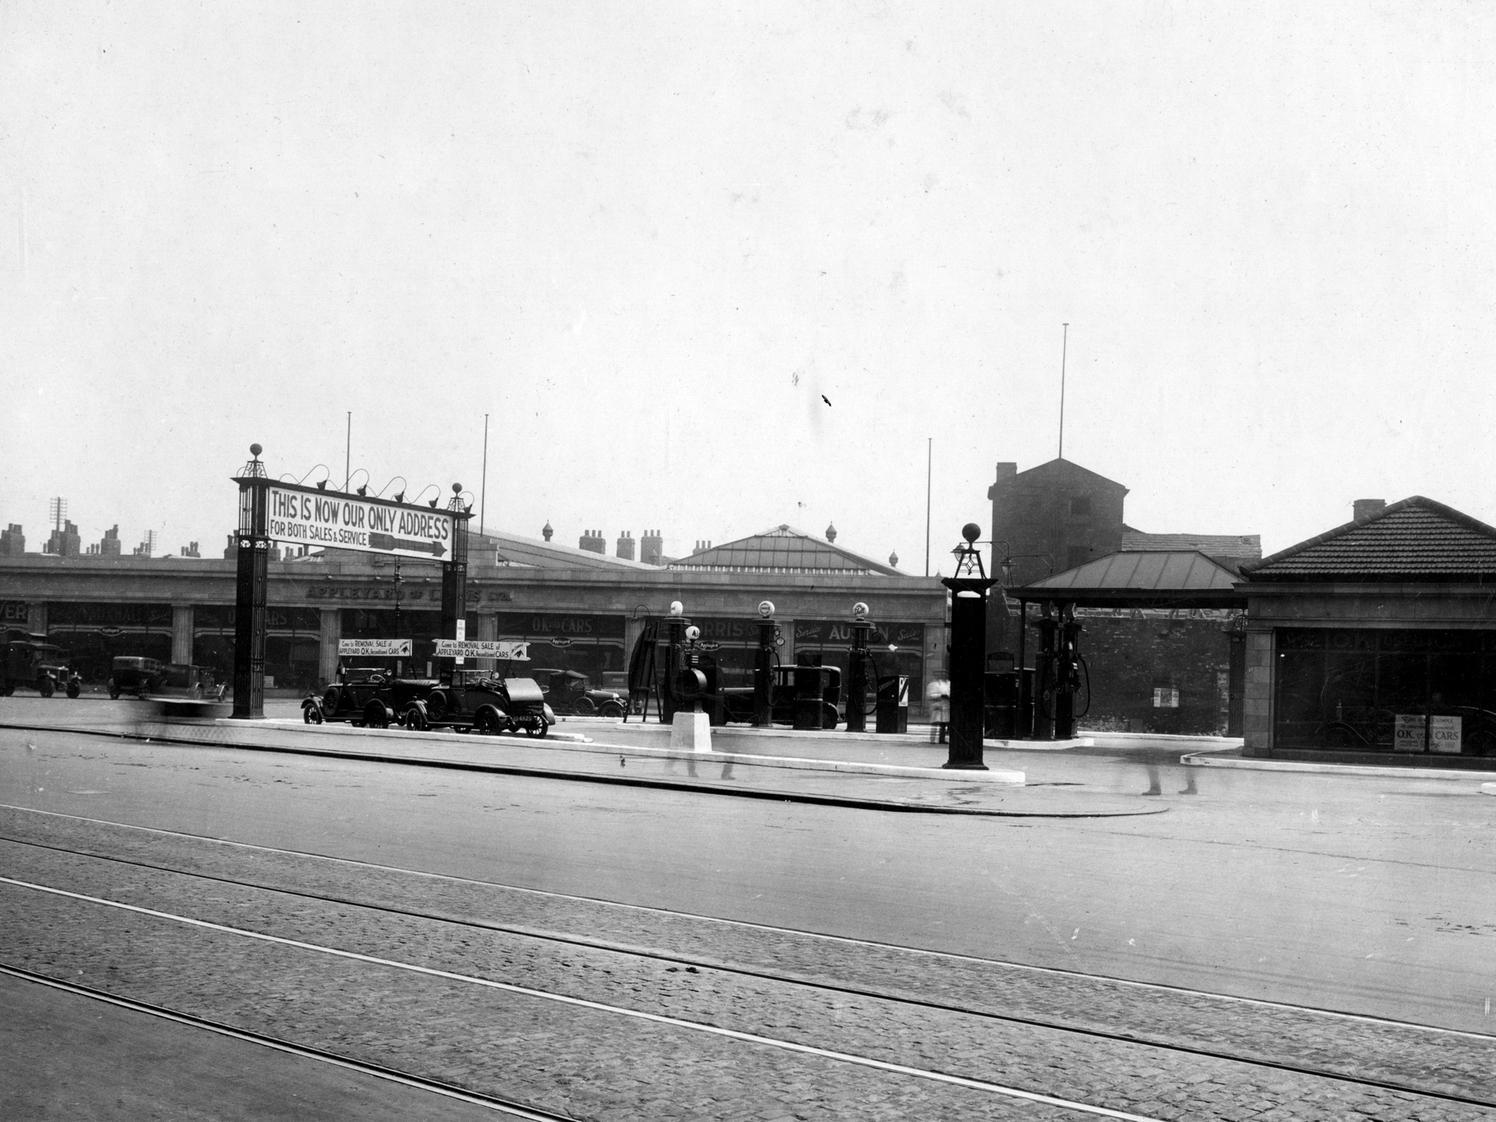 A view of the premises of Appleyard of Leeds Ltd. at the junction of North Street with Sheepscar Street South. This photo shows the car showroom, garage and petrol pumps.